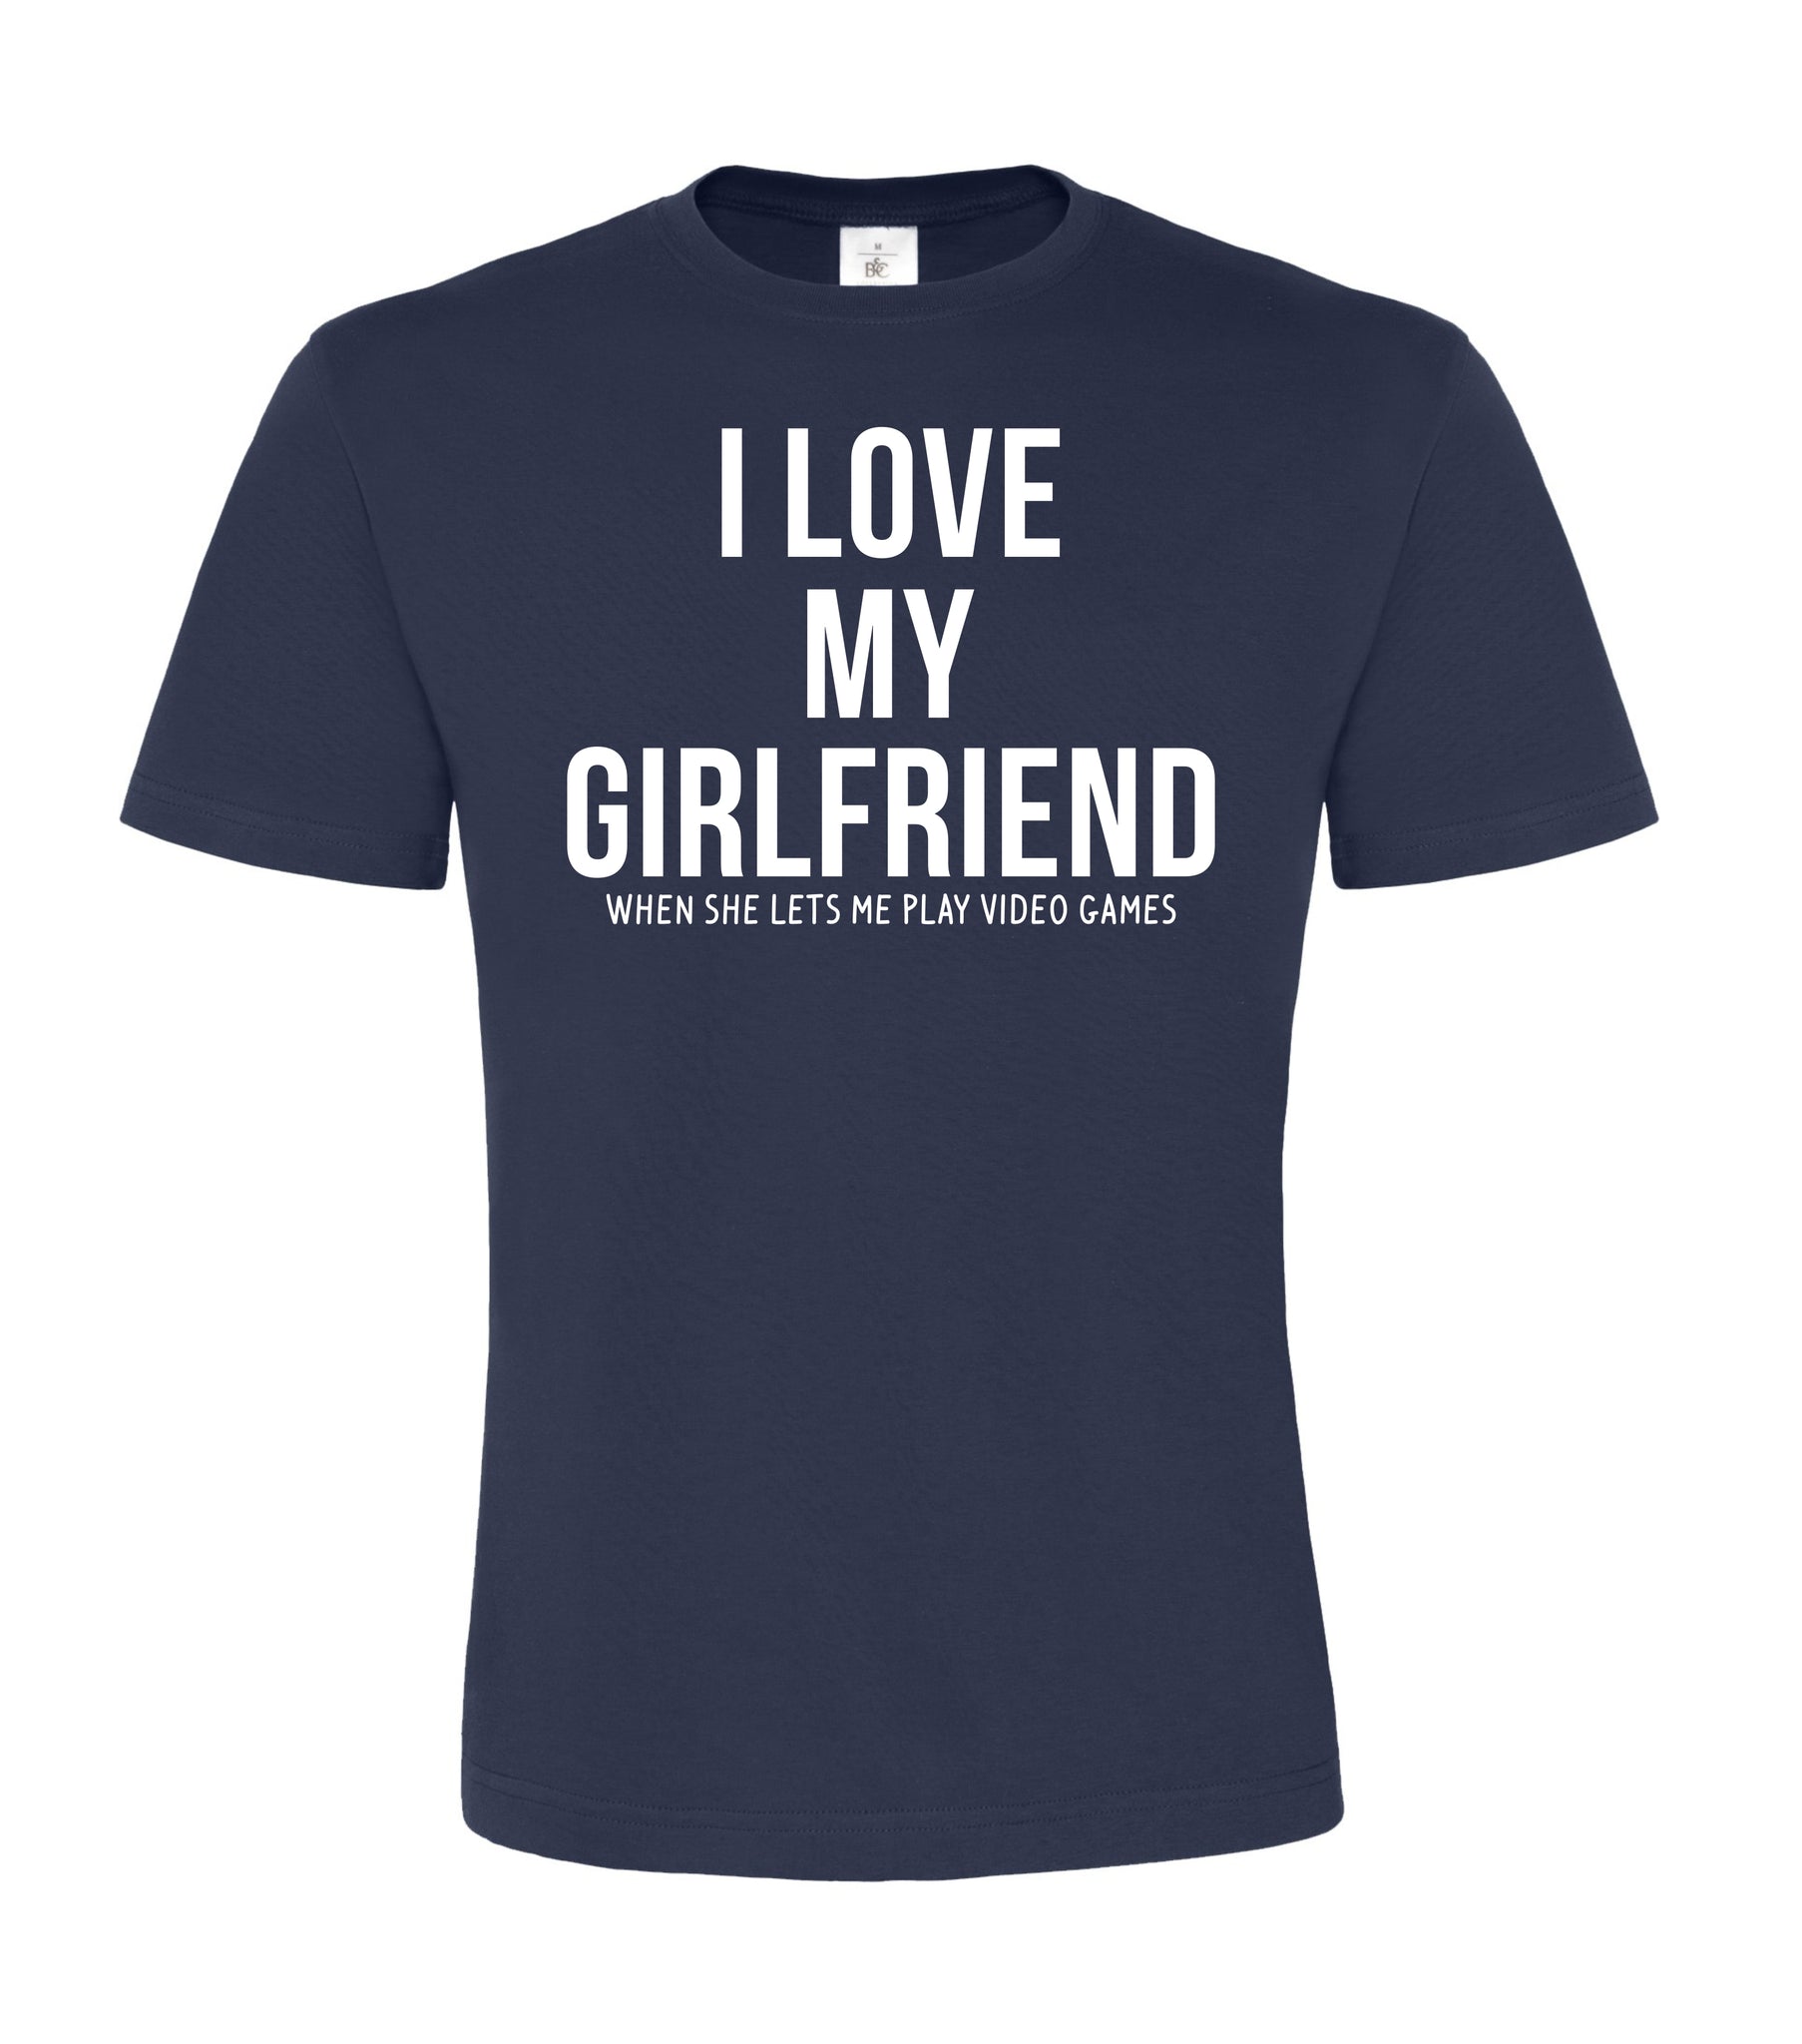 I Love My Girlfriend Lets Me Play Video Games' - Video Game - Pin